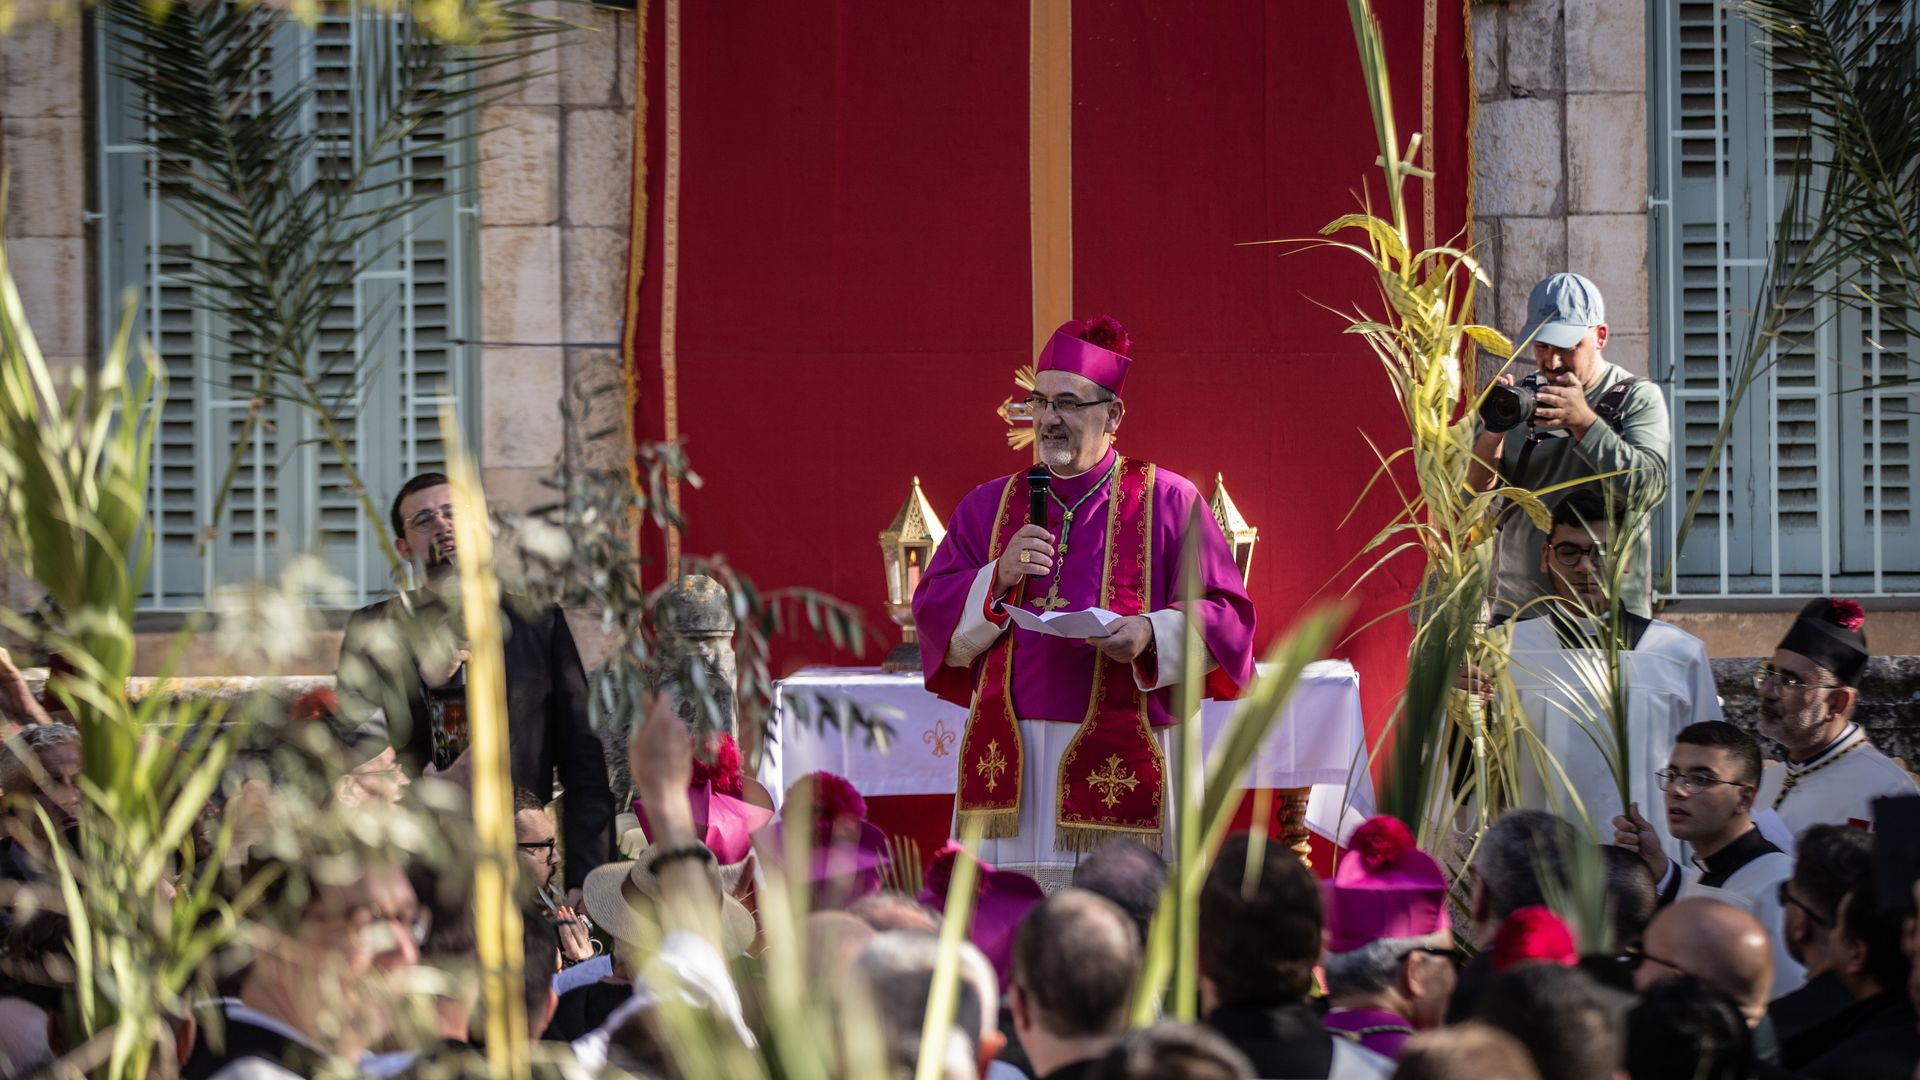 Pierbattista Pizzaballa, the Archbishop of the Latin Patriarchate of Jerusalem, led the feast held at the site. (Photo by Mostafa Alkharouf/Anadolu Agency via Getty Images)